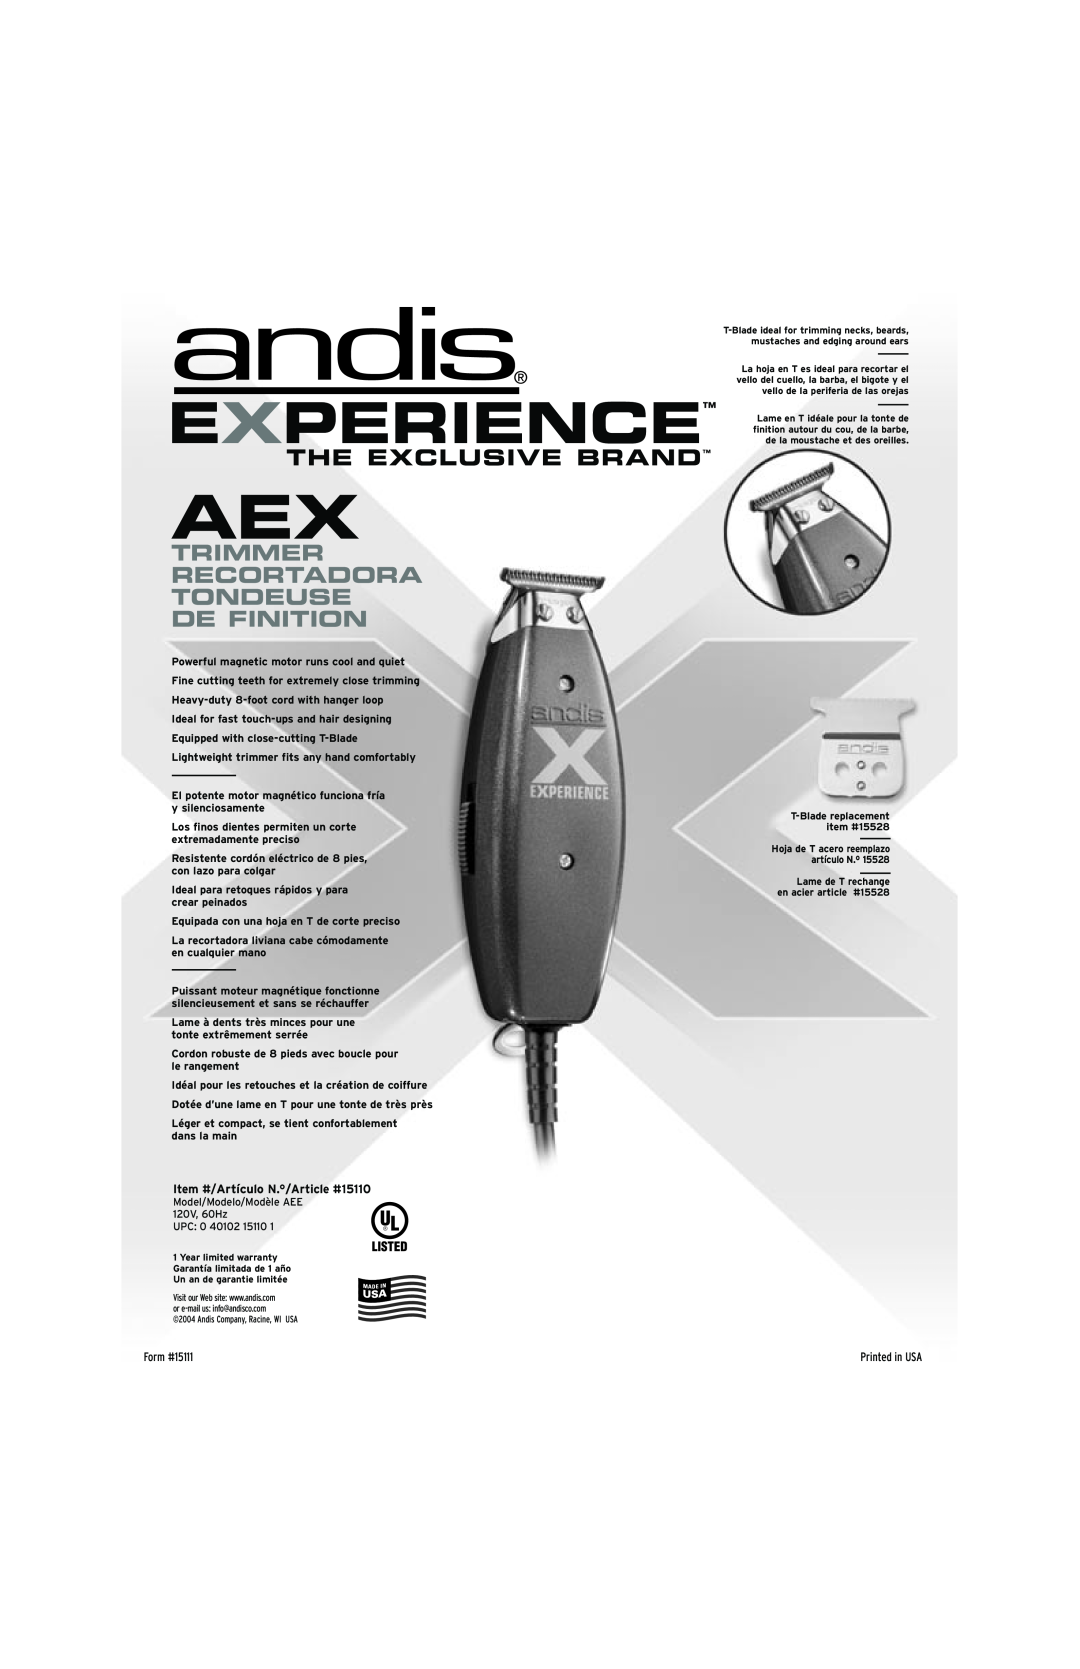 Andis Company AEE 120V manual Experience, The Exclusive Brand, Trimmer Recortadora Tondeuse De Finition, Form #15111 